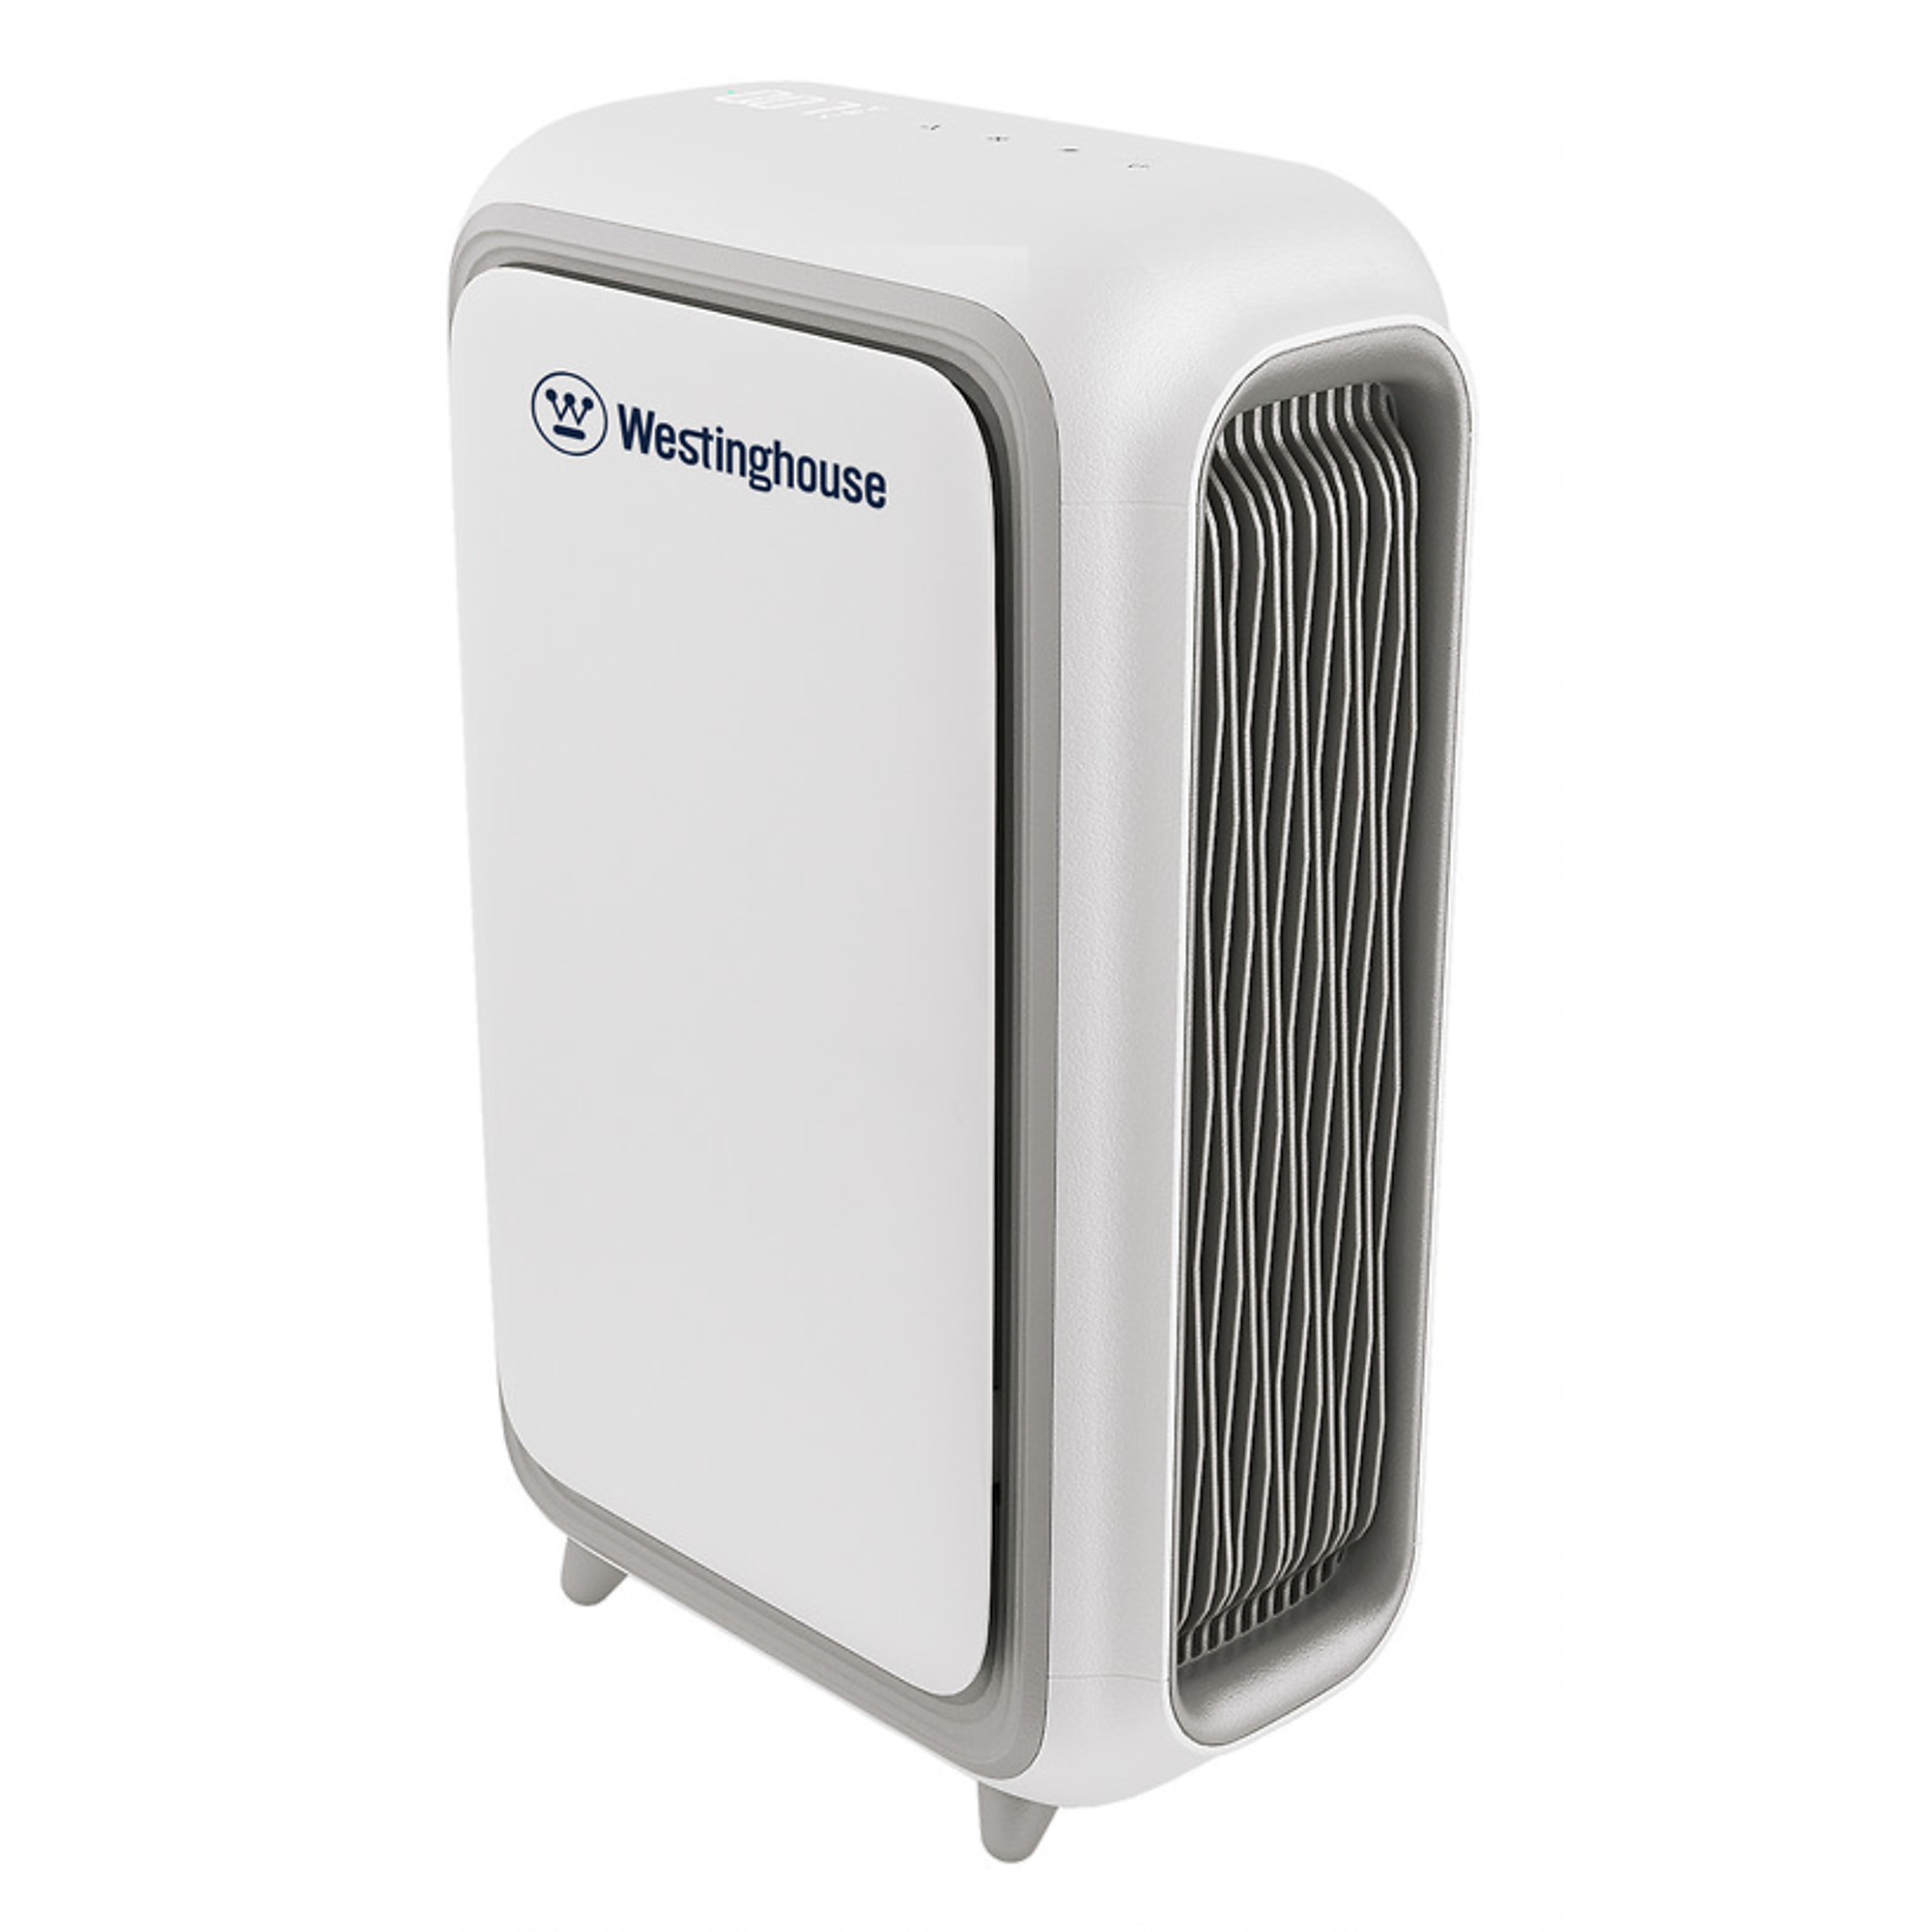 Westinghouse, NCCO Air Purifier, Max. Coverage Area 700 ftÂ², Air Delivery 230 cfm, Model WES-WH100P